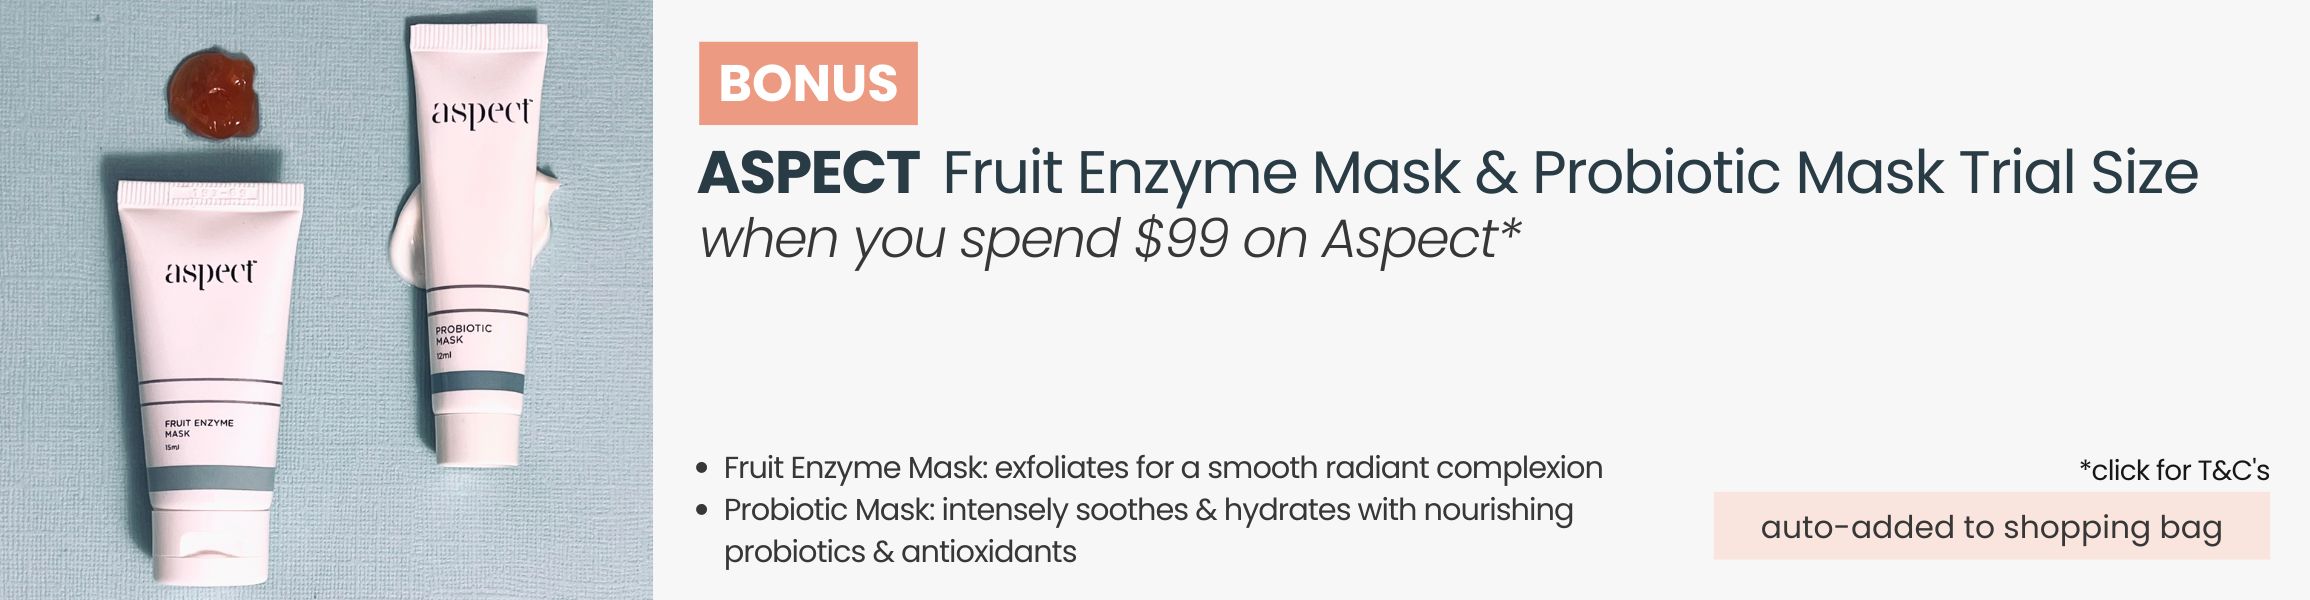 BONUS Aspect Fruit Enzyme Mask &  Probiotic Mask Trial Size. Automatically added to your shopping bag when you spend $99 on Aspect products.